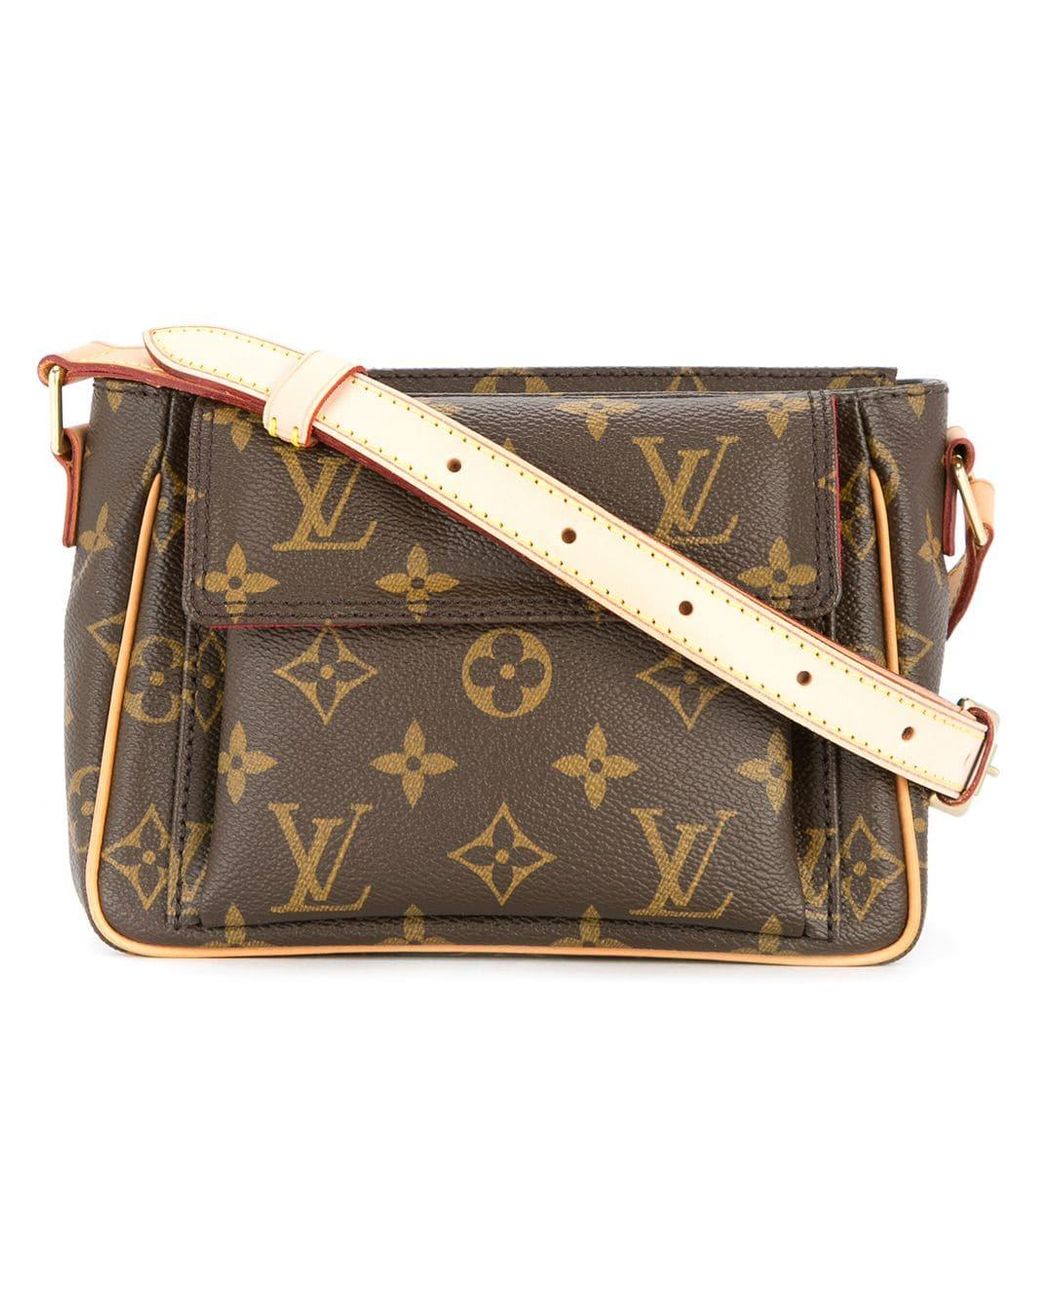 Louis Vuitton Pre-Owned Accessories for Men - Shop Now on FARFETCH